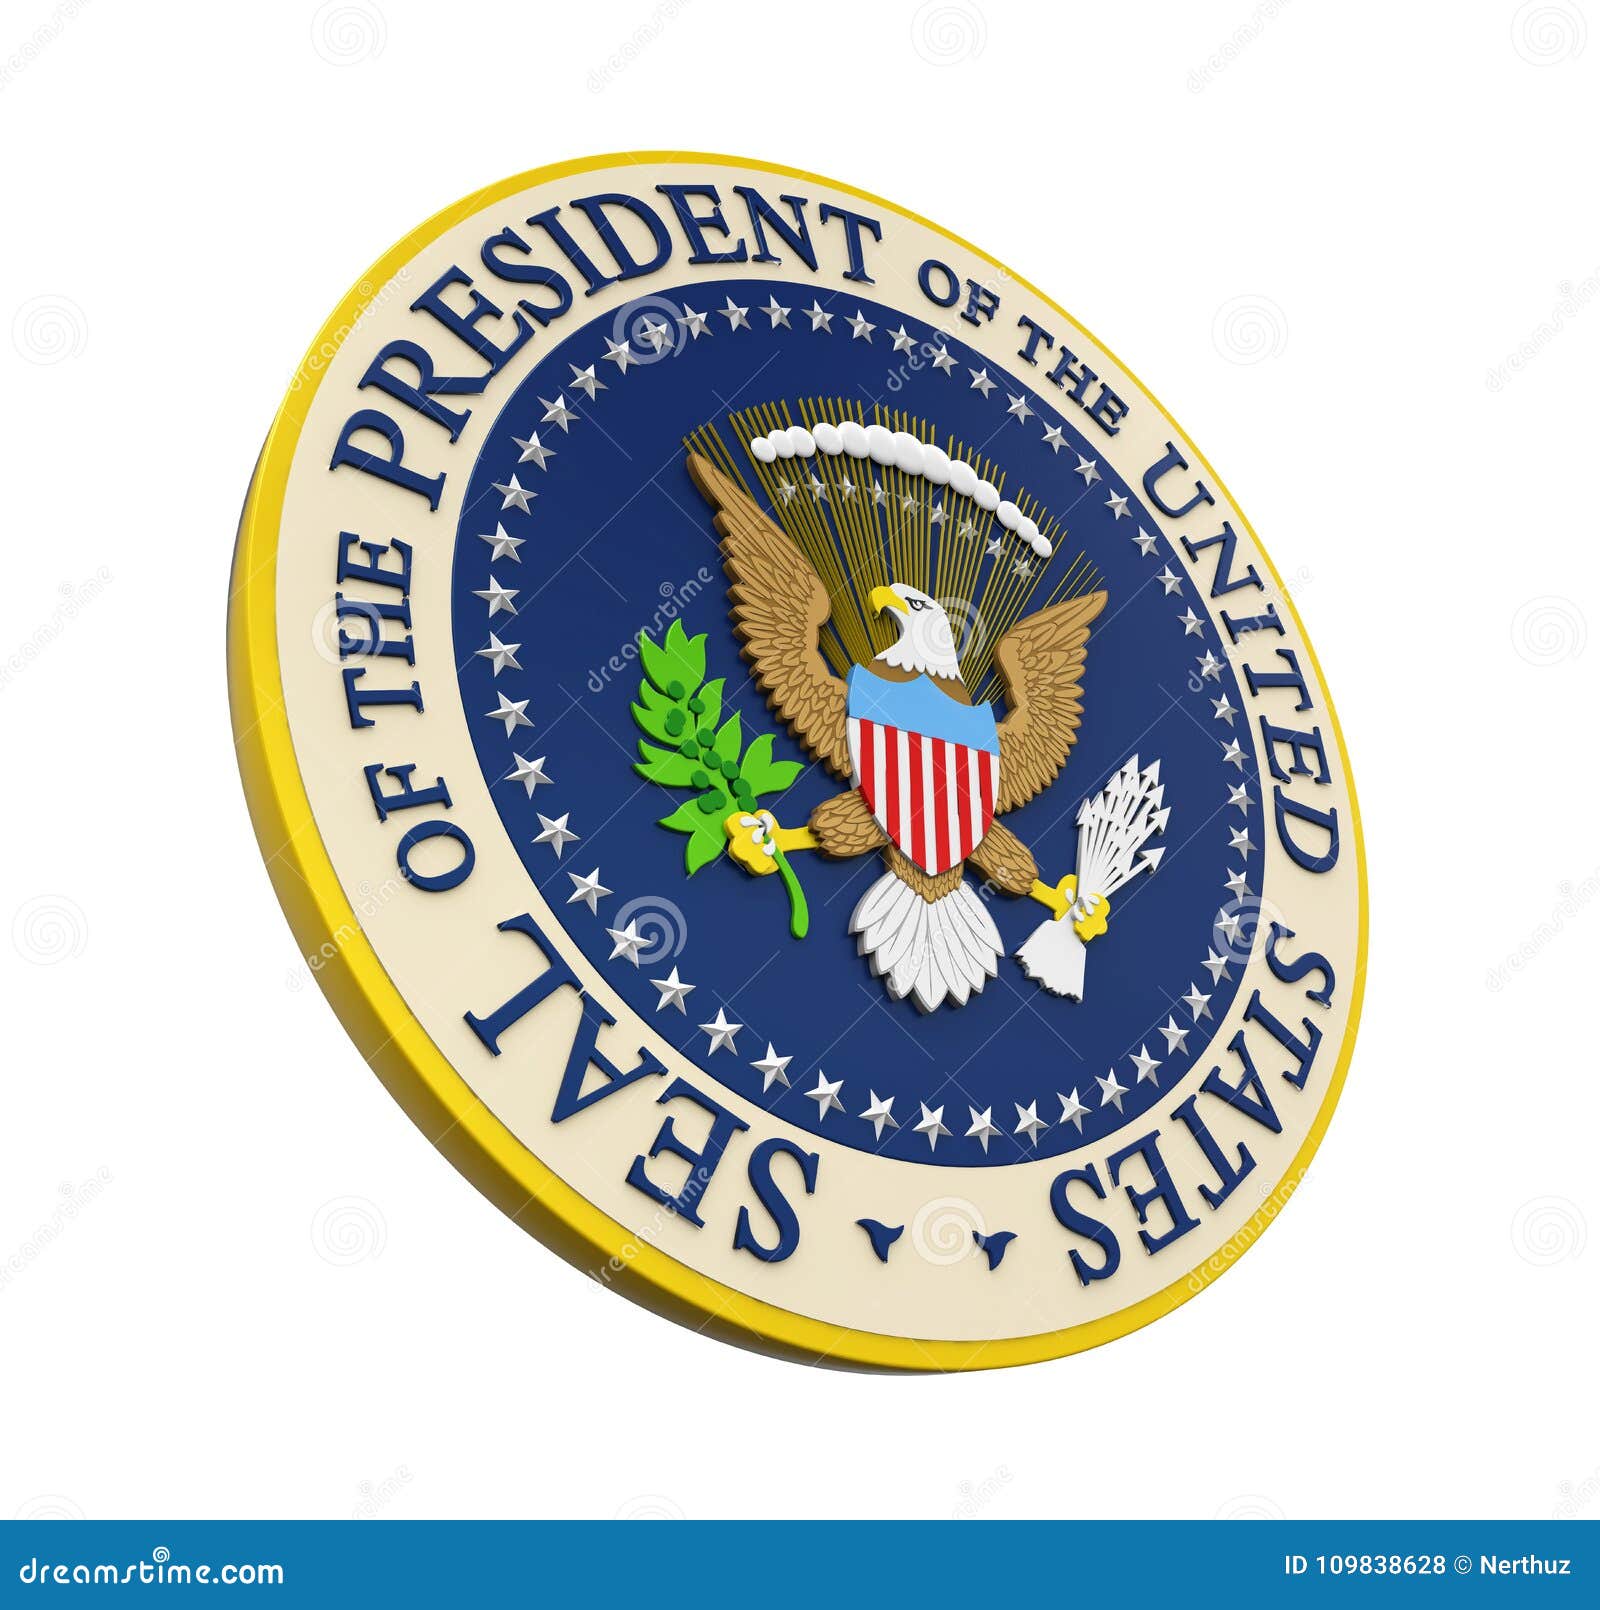 List 105+ Images acronym for president of the united states Full HD, 2k, 4k